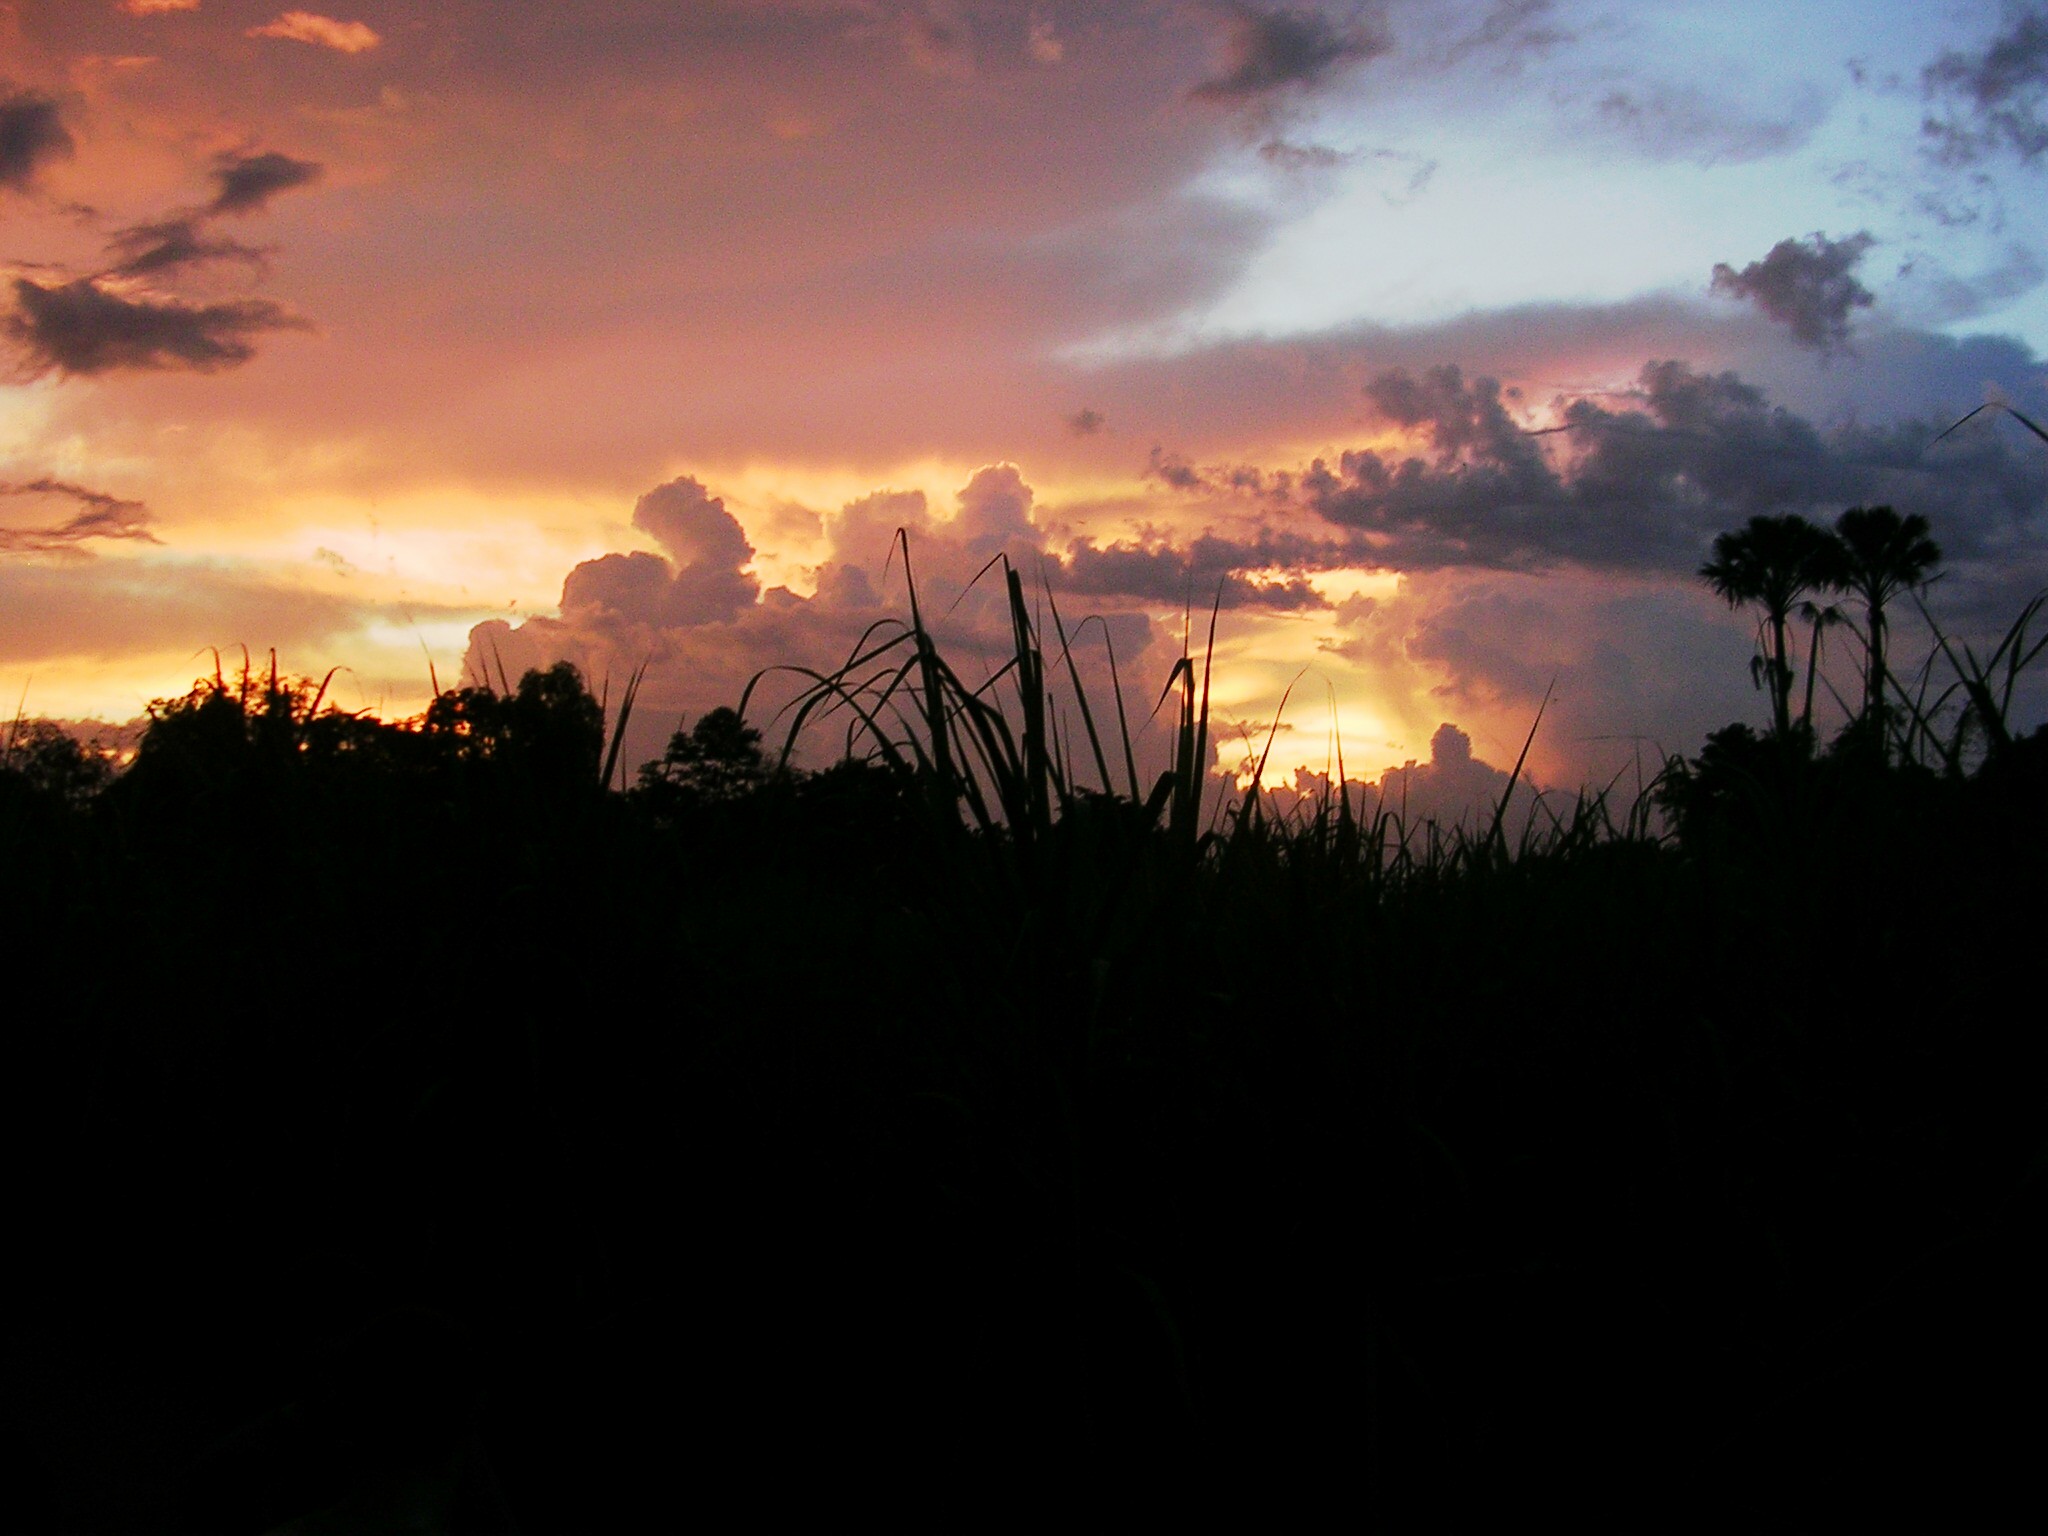 The Sugar cane sky in Negros Phillippines